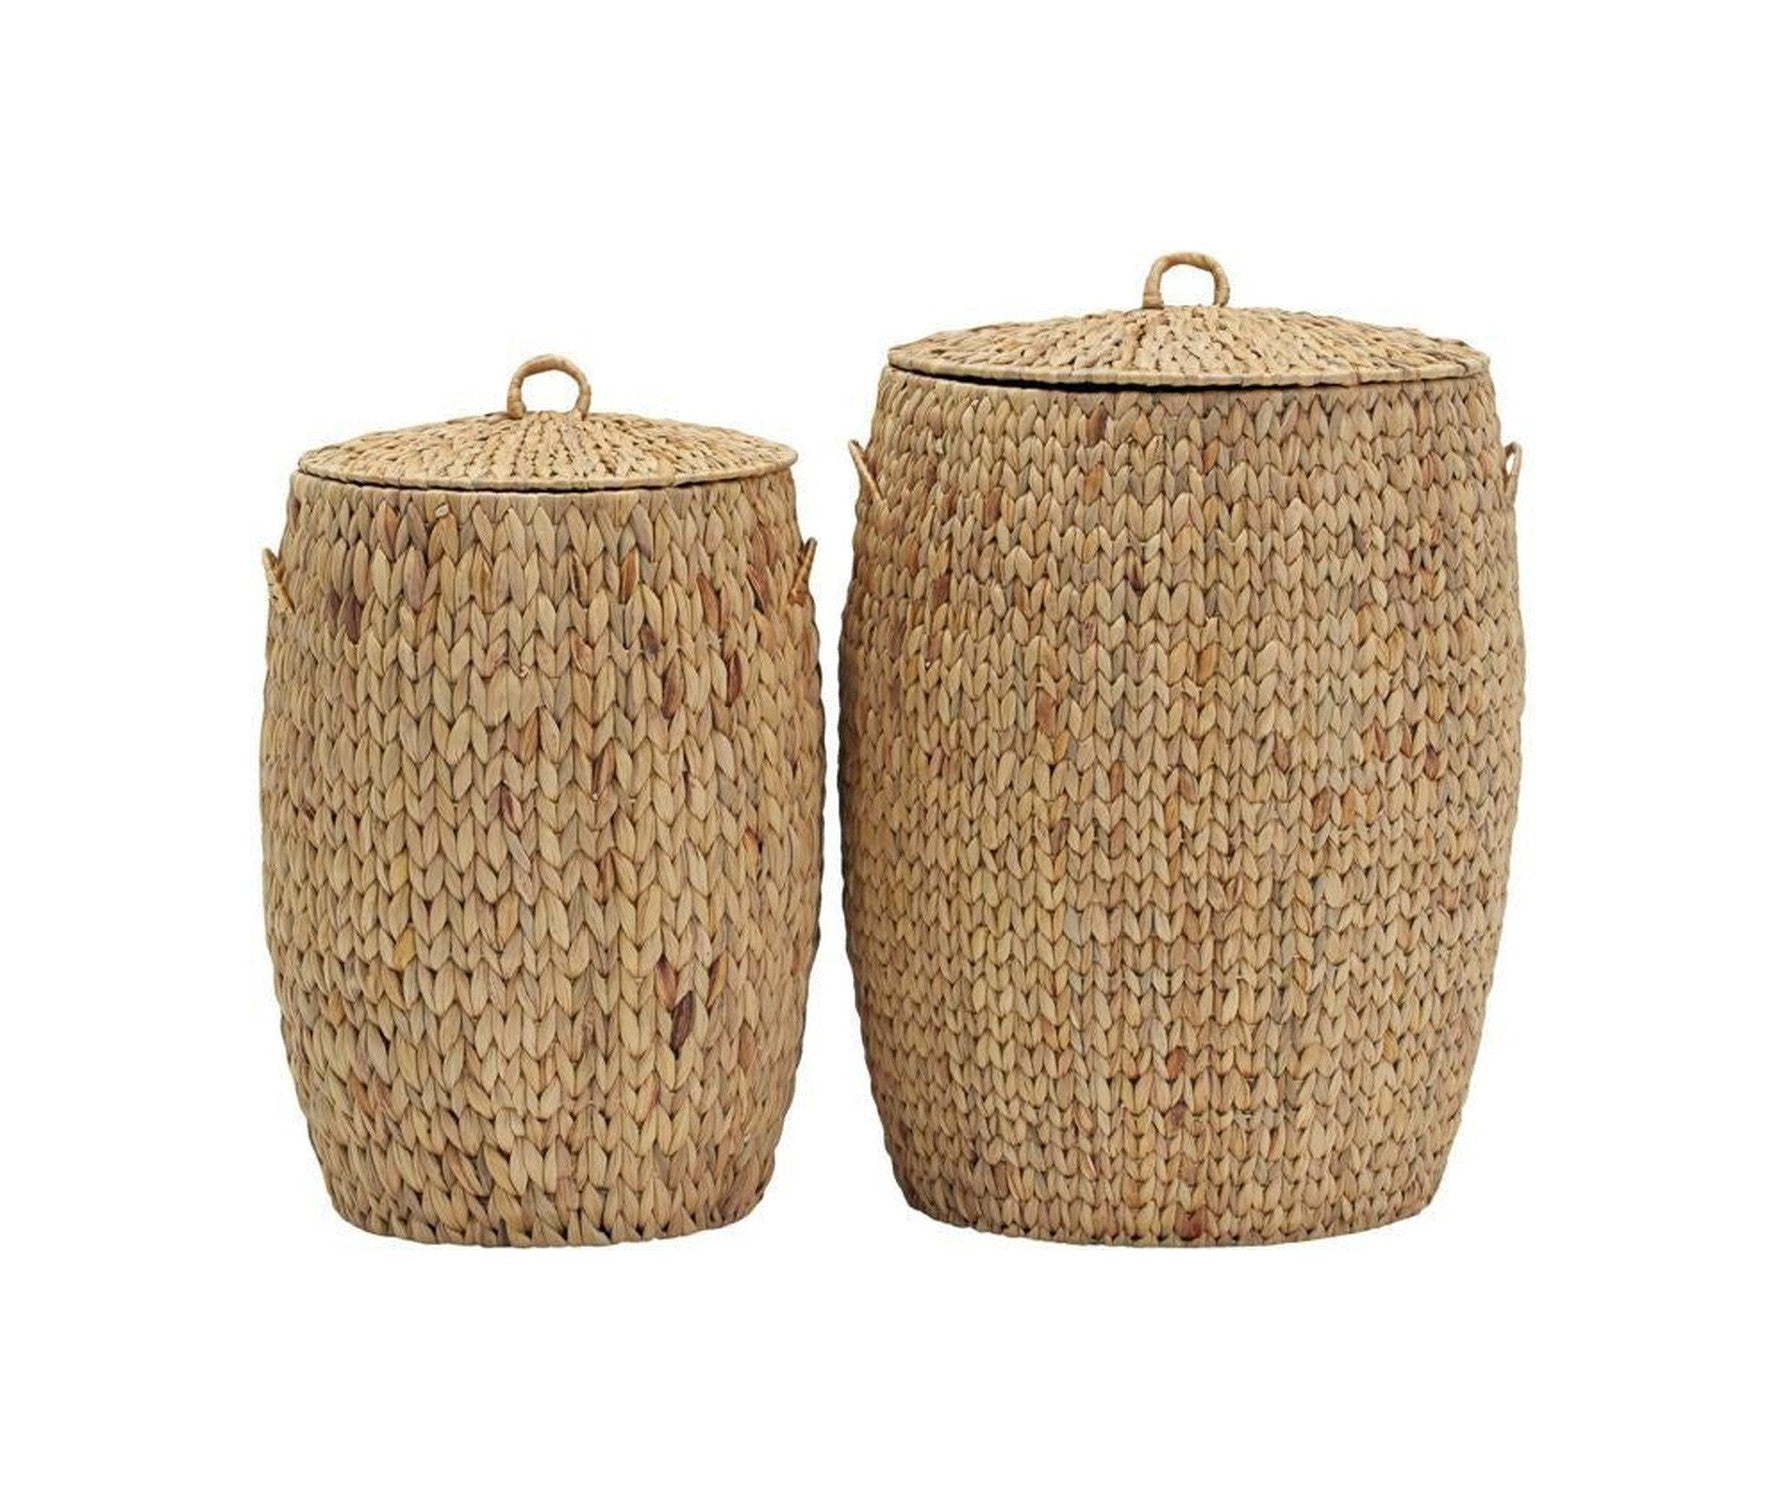 House Doctor Laundry baskets, HDLaun, Natural